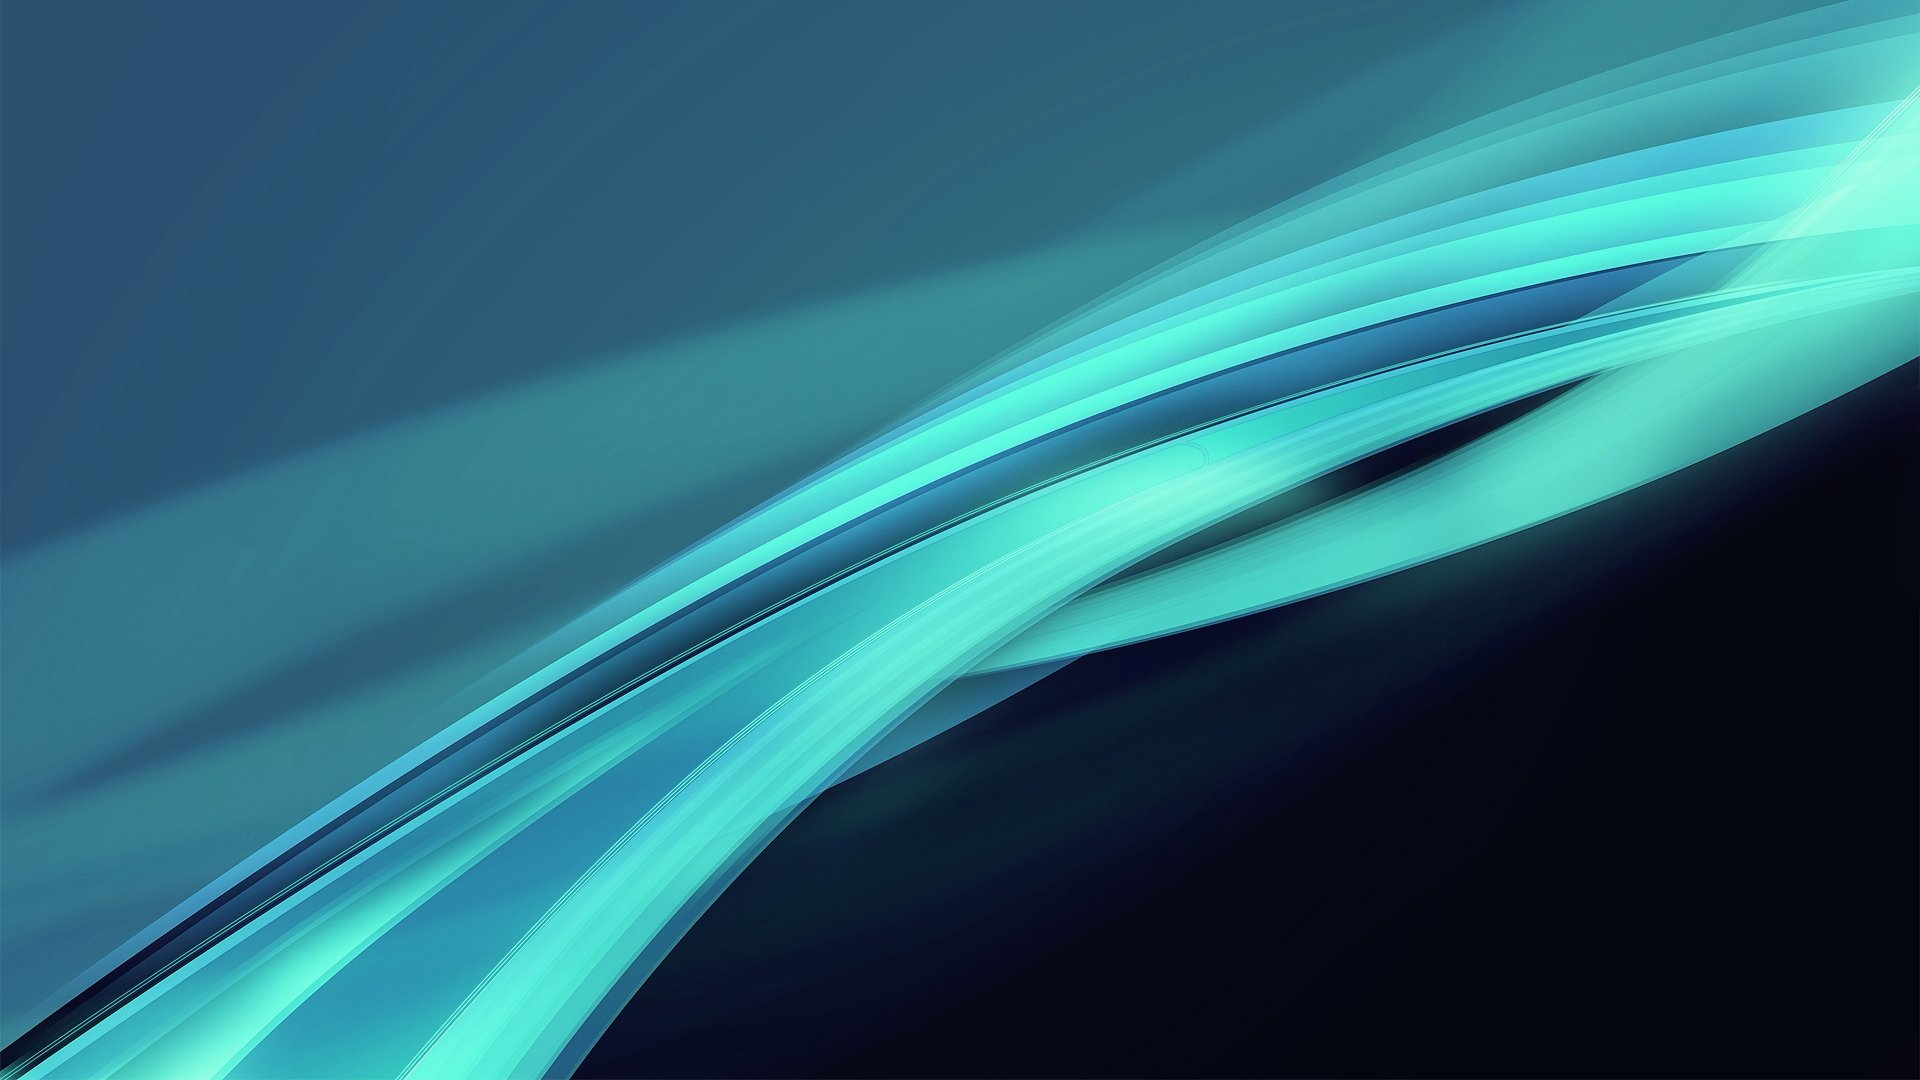 Abstract Turquoise HD Wallpaper | Background Image | 1920x1080